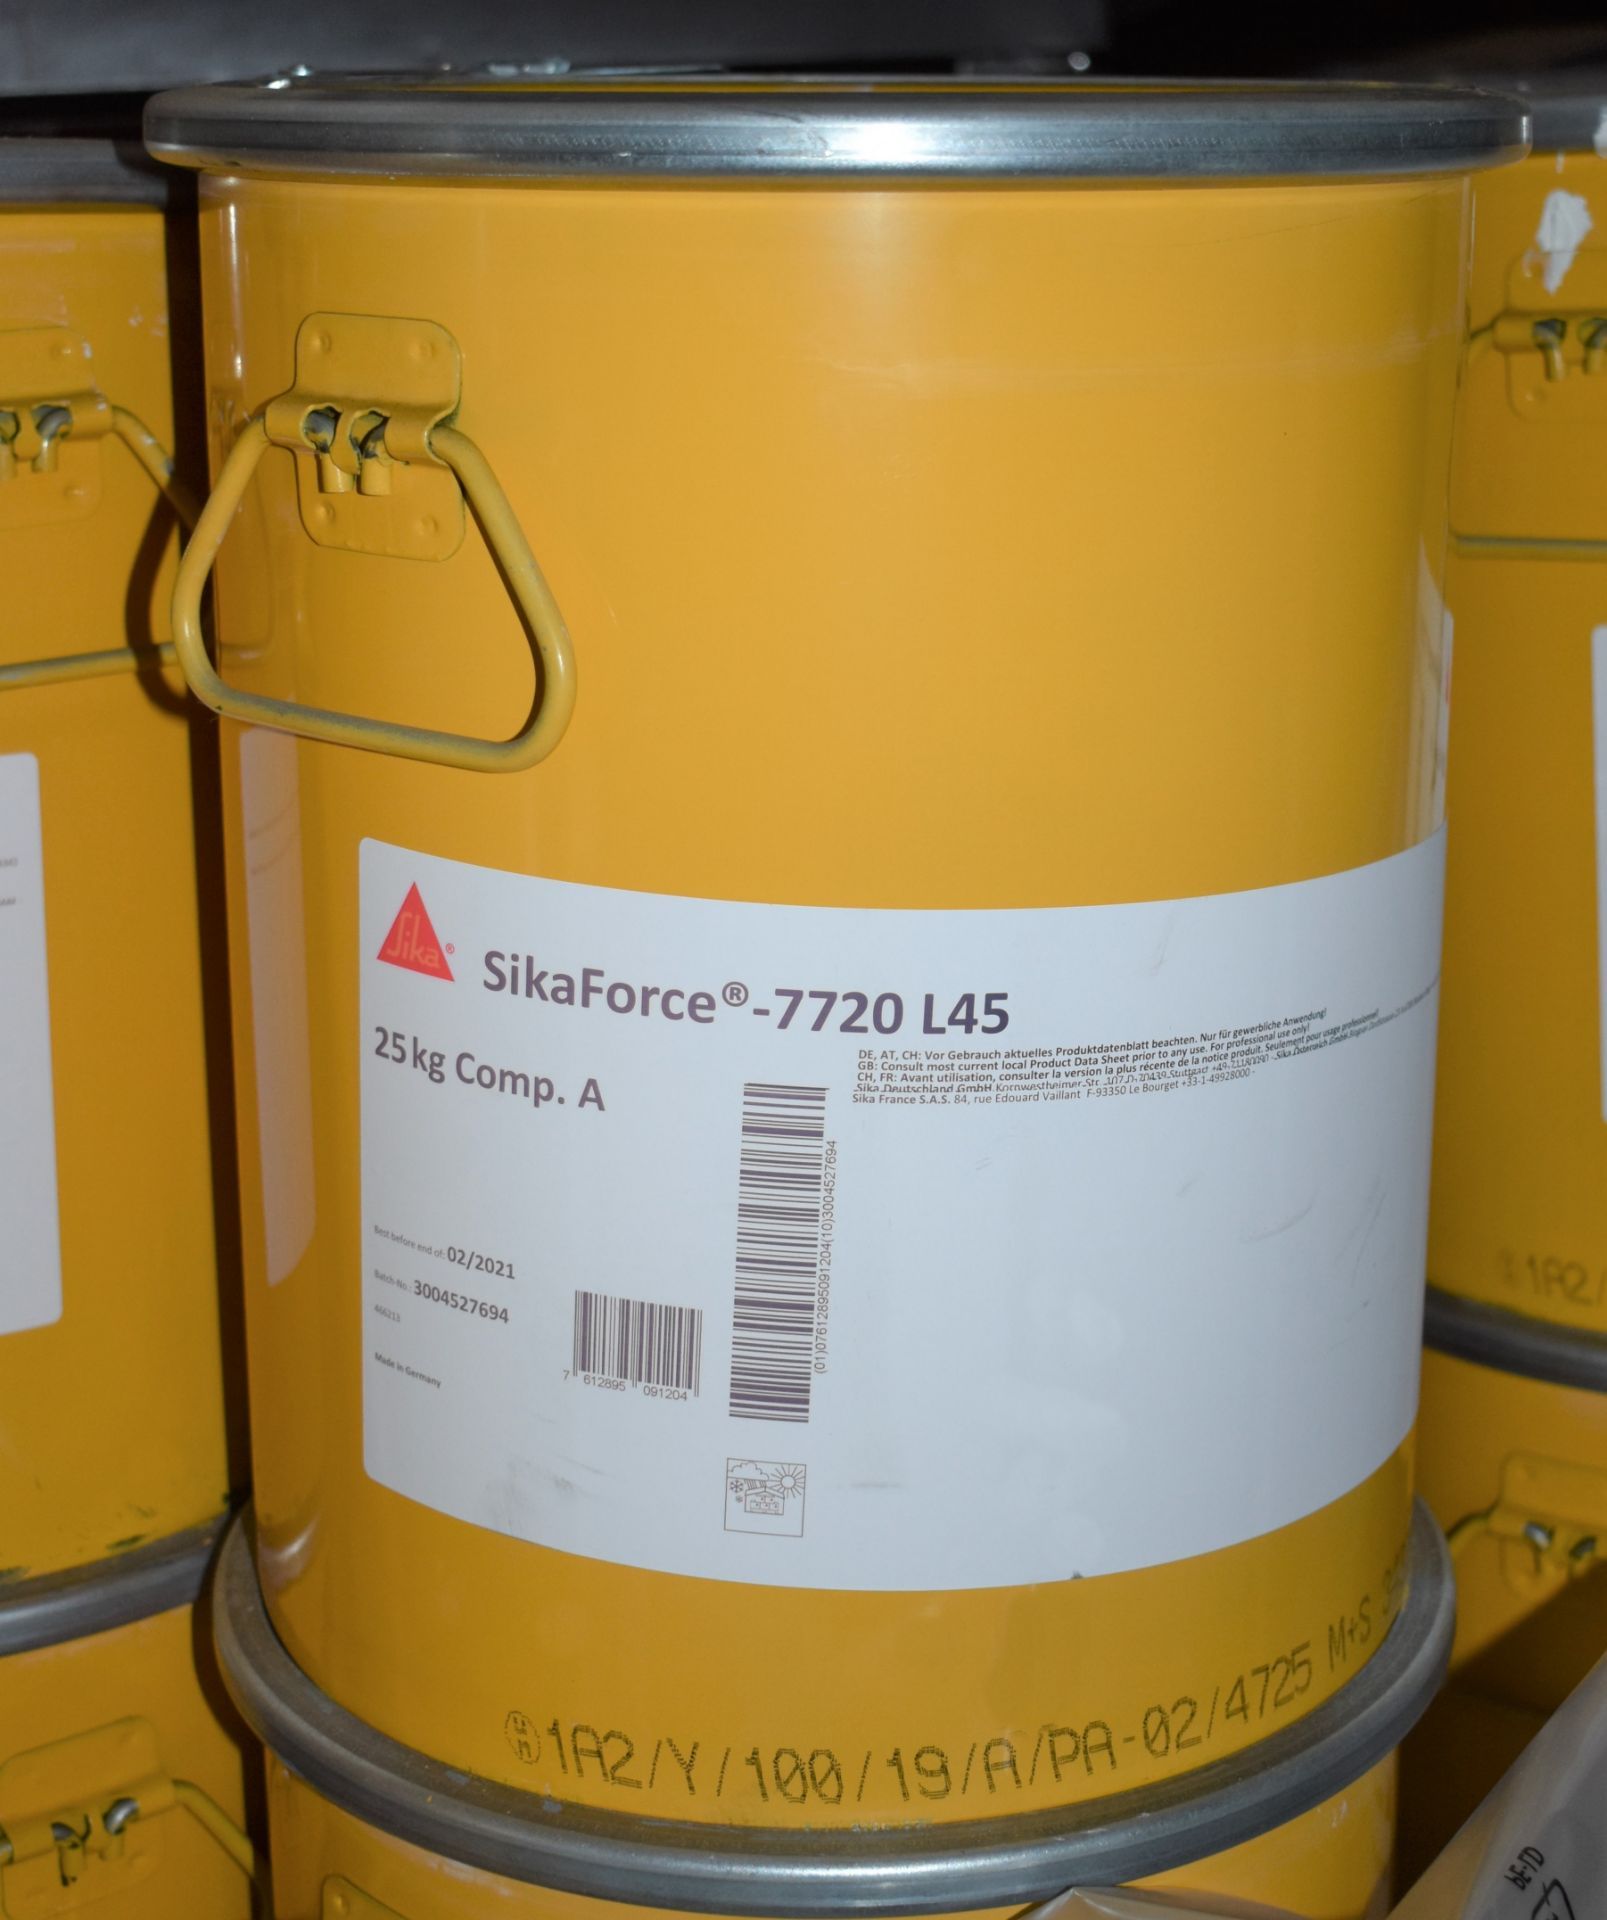 16 x SikaForce -7720 L45 None Sagging Assembly Adhesive 25kg Barrels- New Sealed Stock - CL622 -